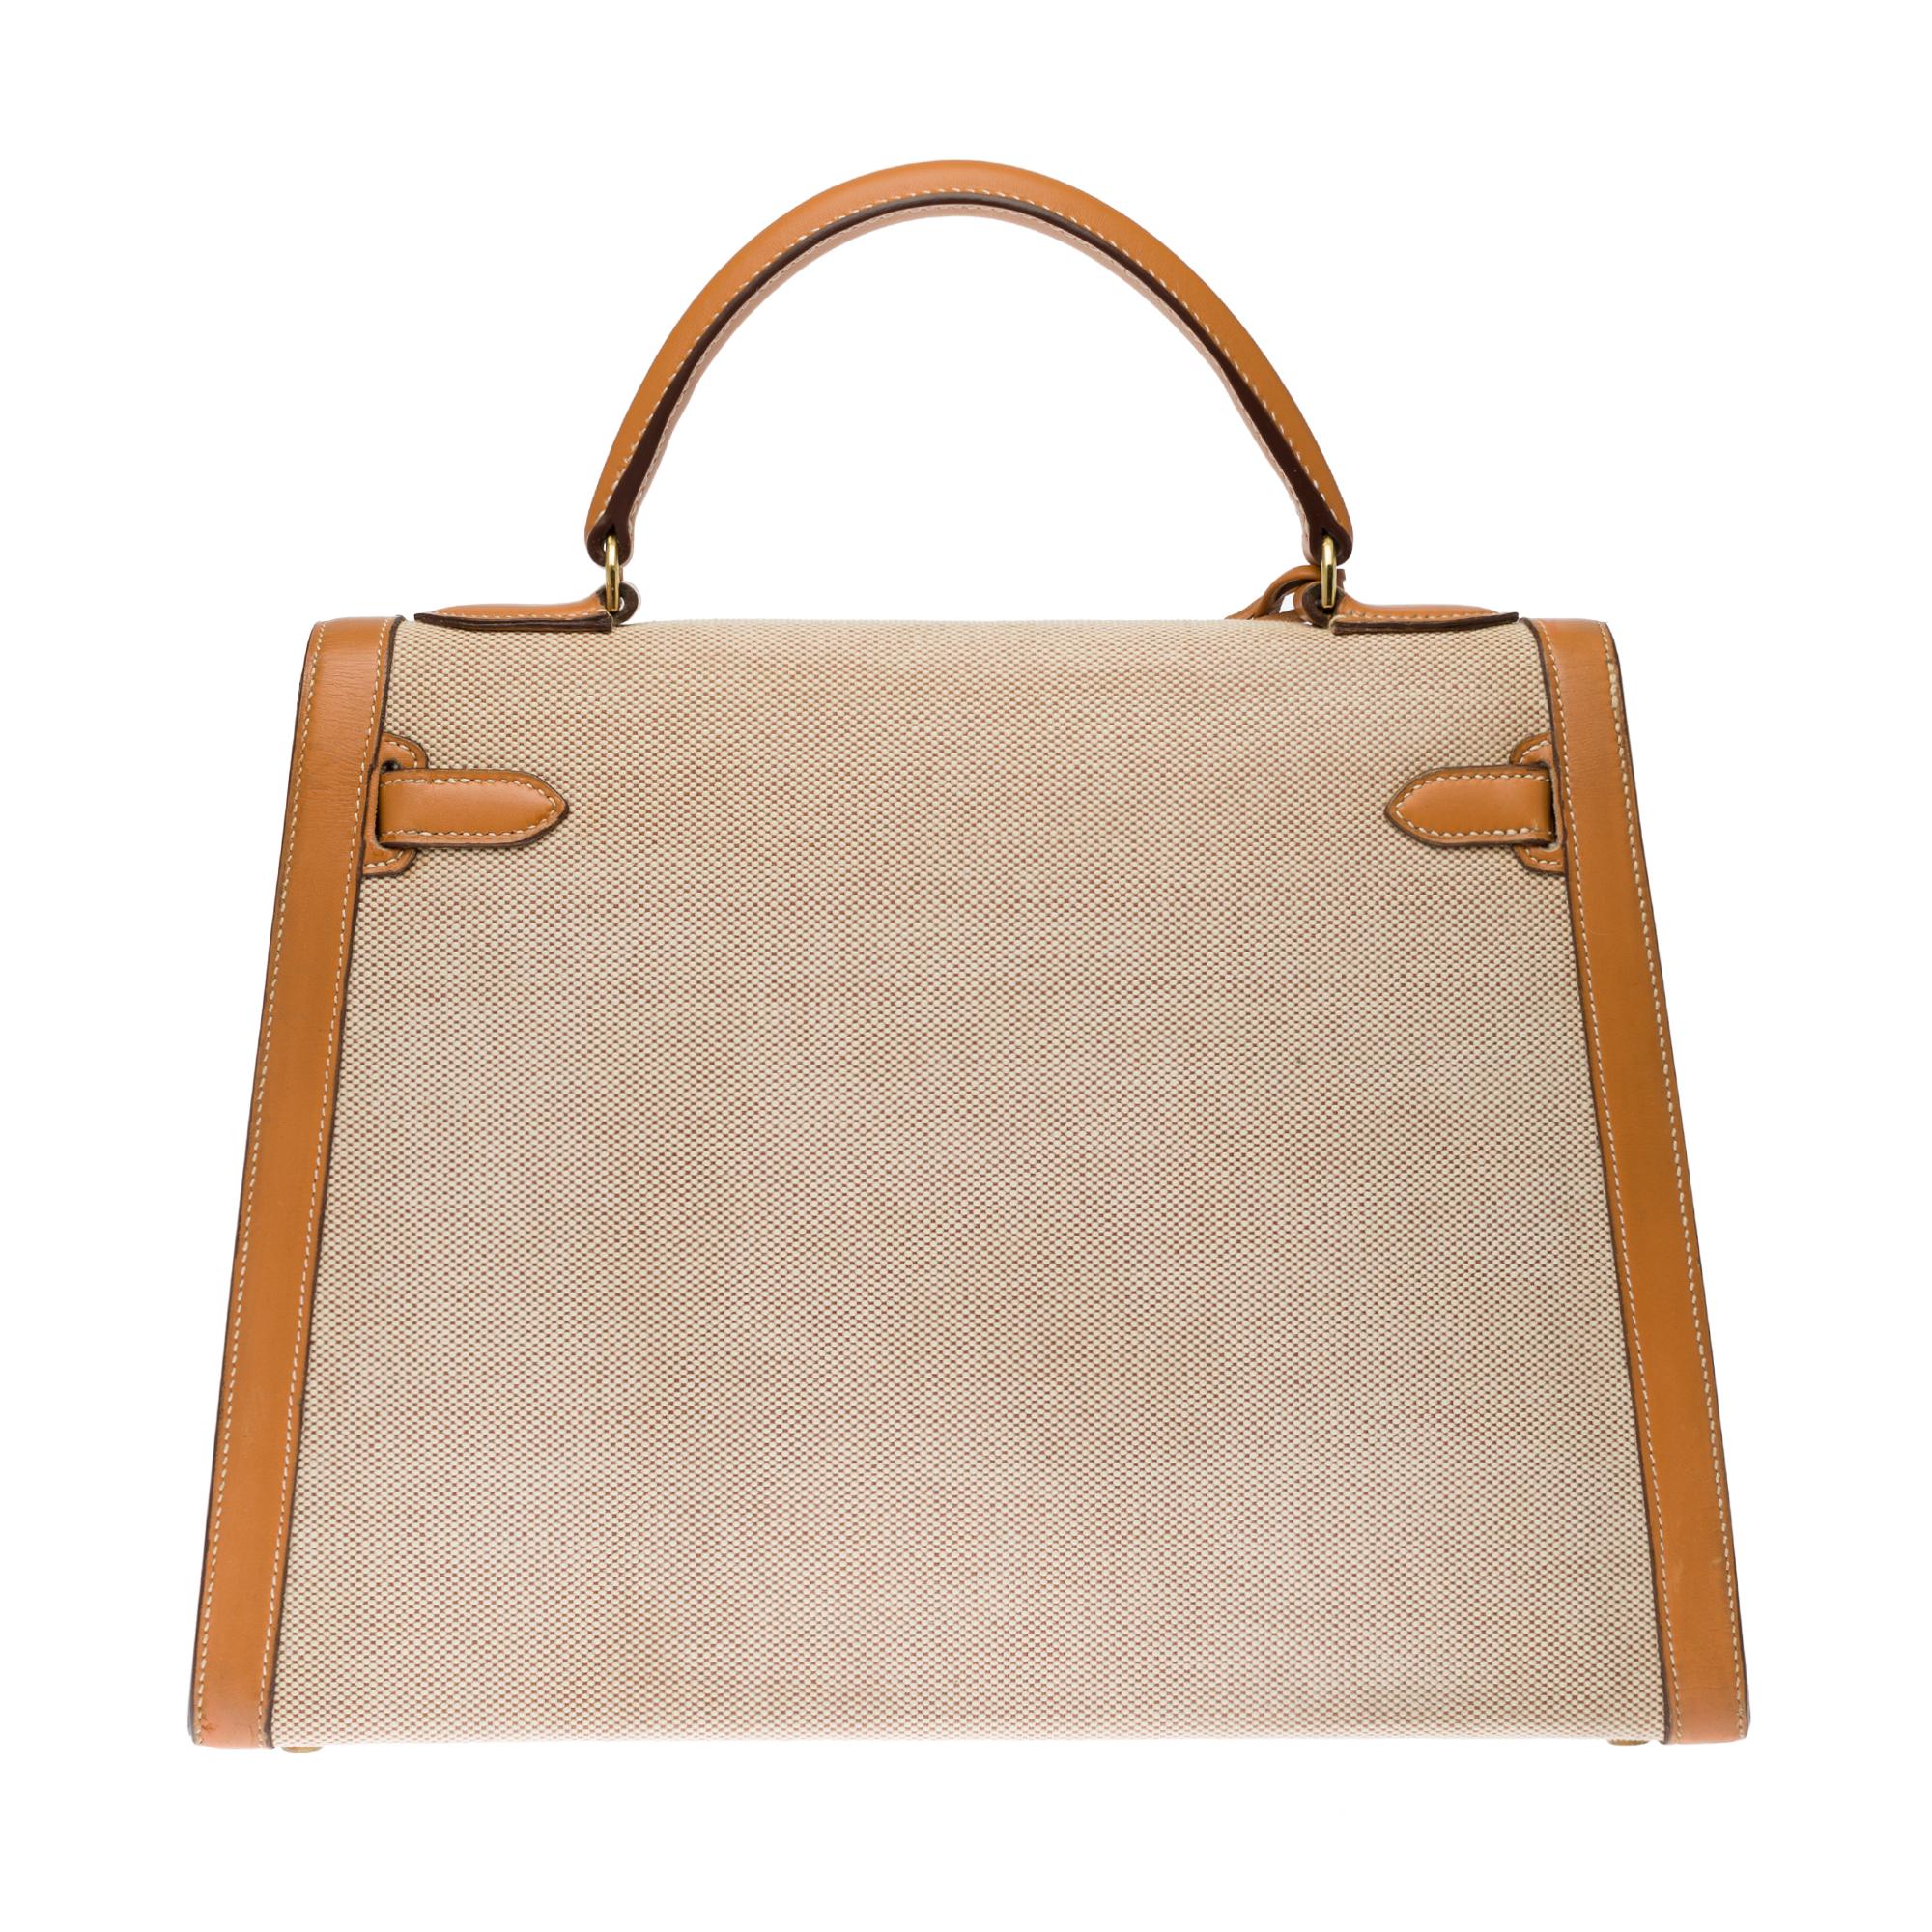 Gorgeous Hermes Kelly handbag 32 cm sellier bi-material in Chamonix gold leather and beige officer canvas, gold plated metal hardware, white saddle stitches, simple handle in gold leather, a gold leather handle allowing a hand or shoulder